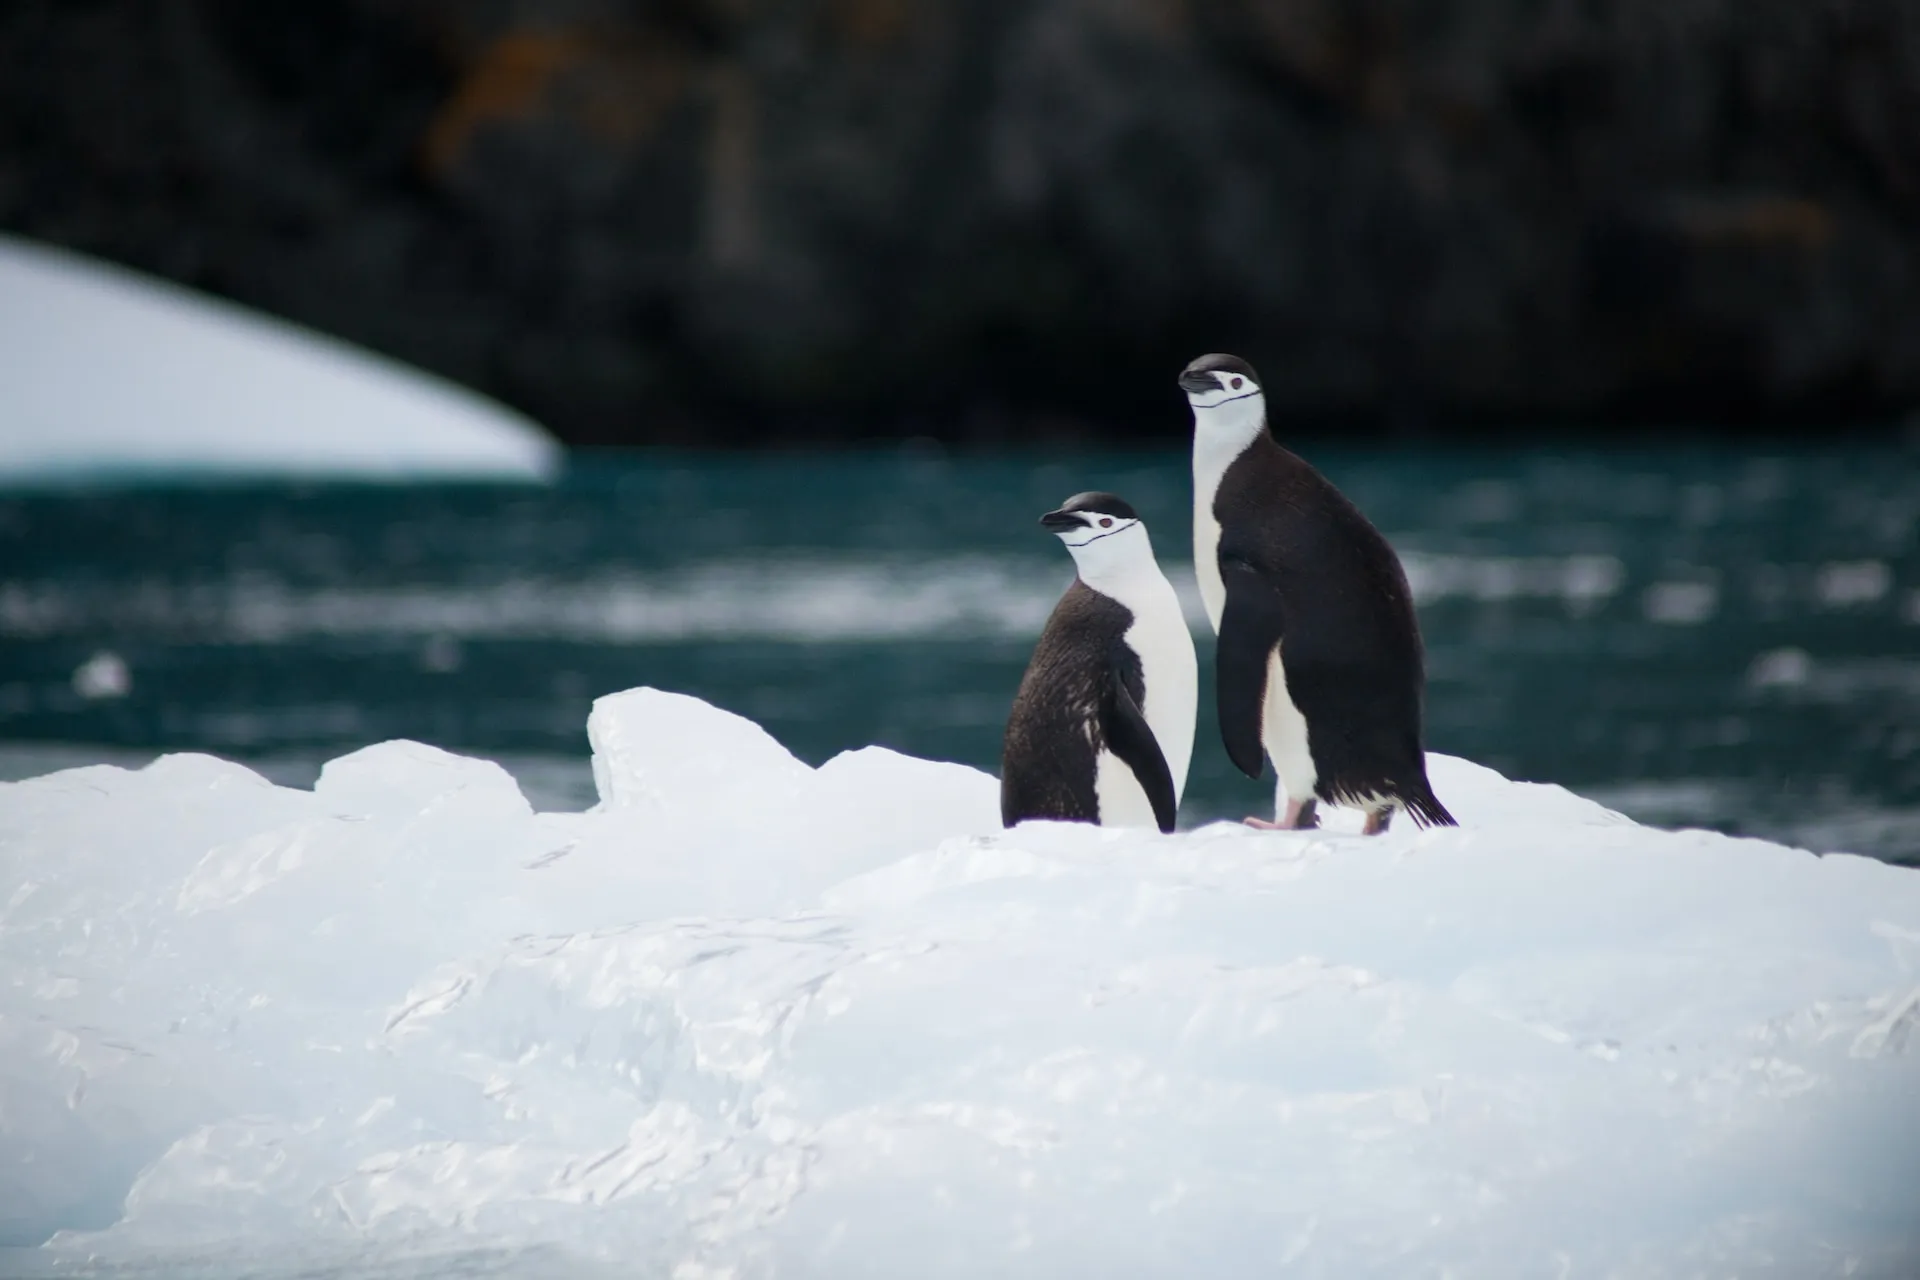 Two adorable penguins happily perched on icy terrain.